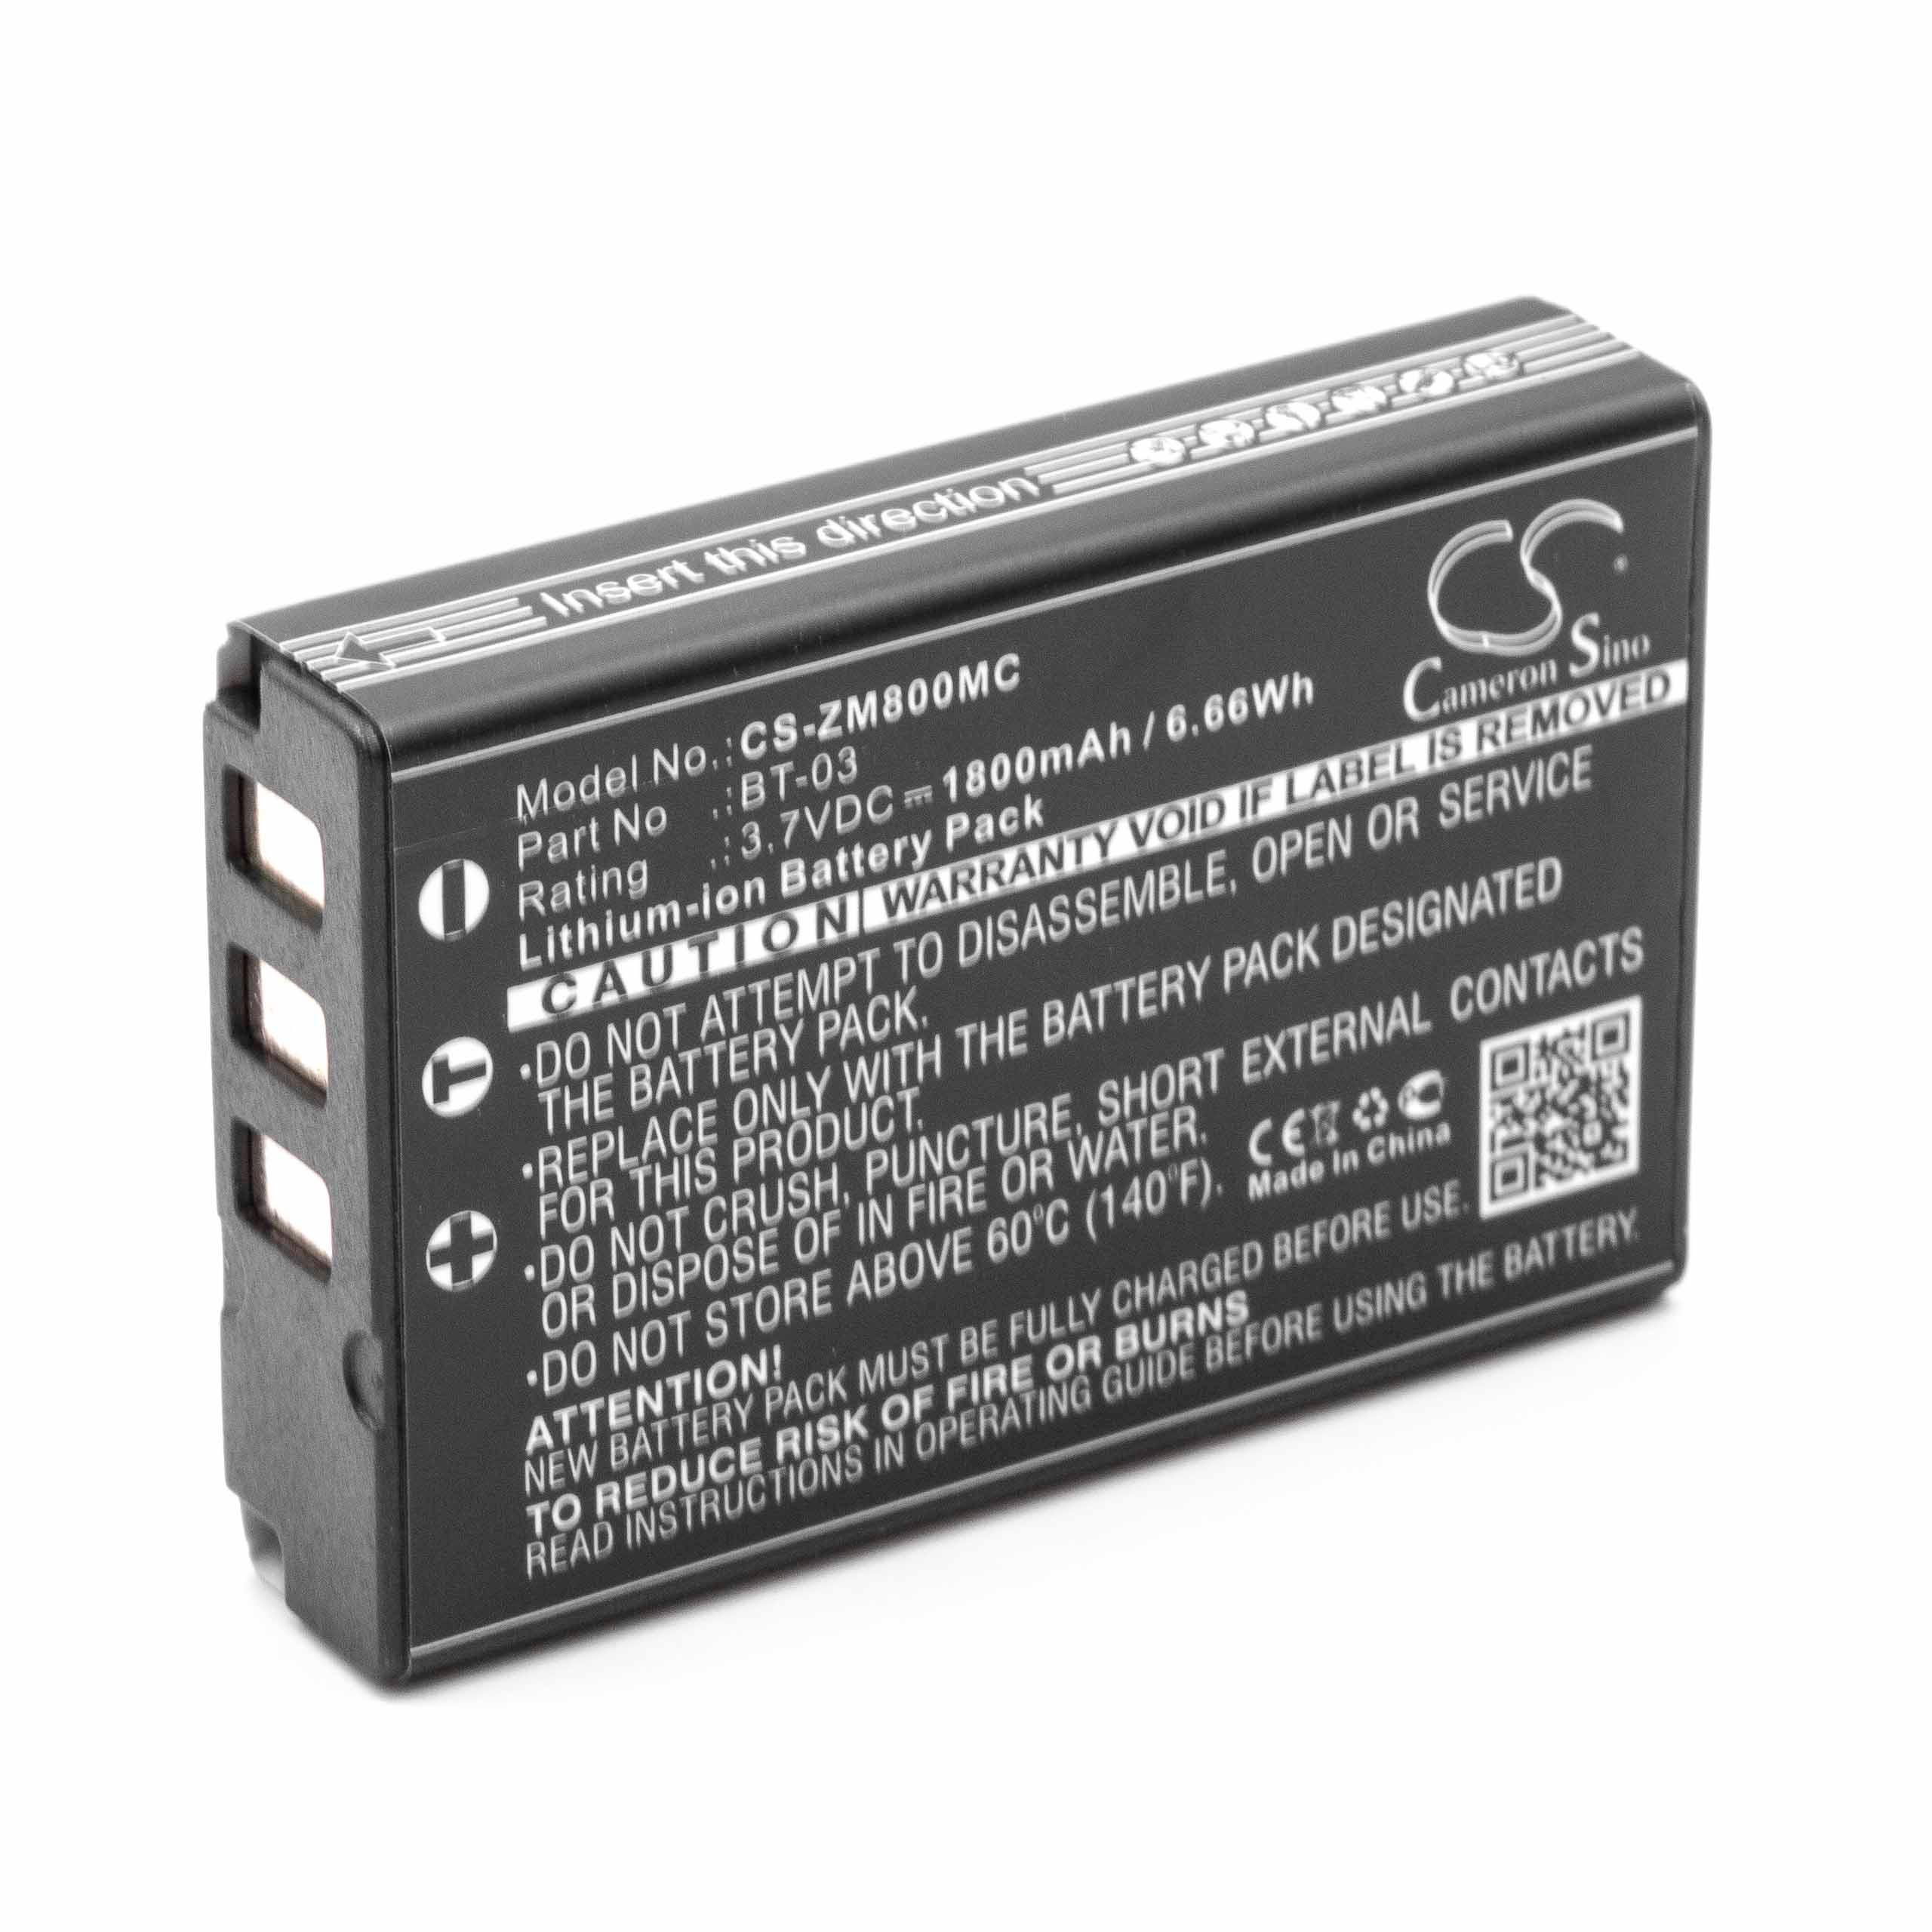 Battery Replacement for Zoom BT-03 - 1800mAh, 3.7V, Li-Ion